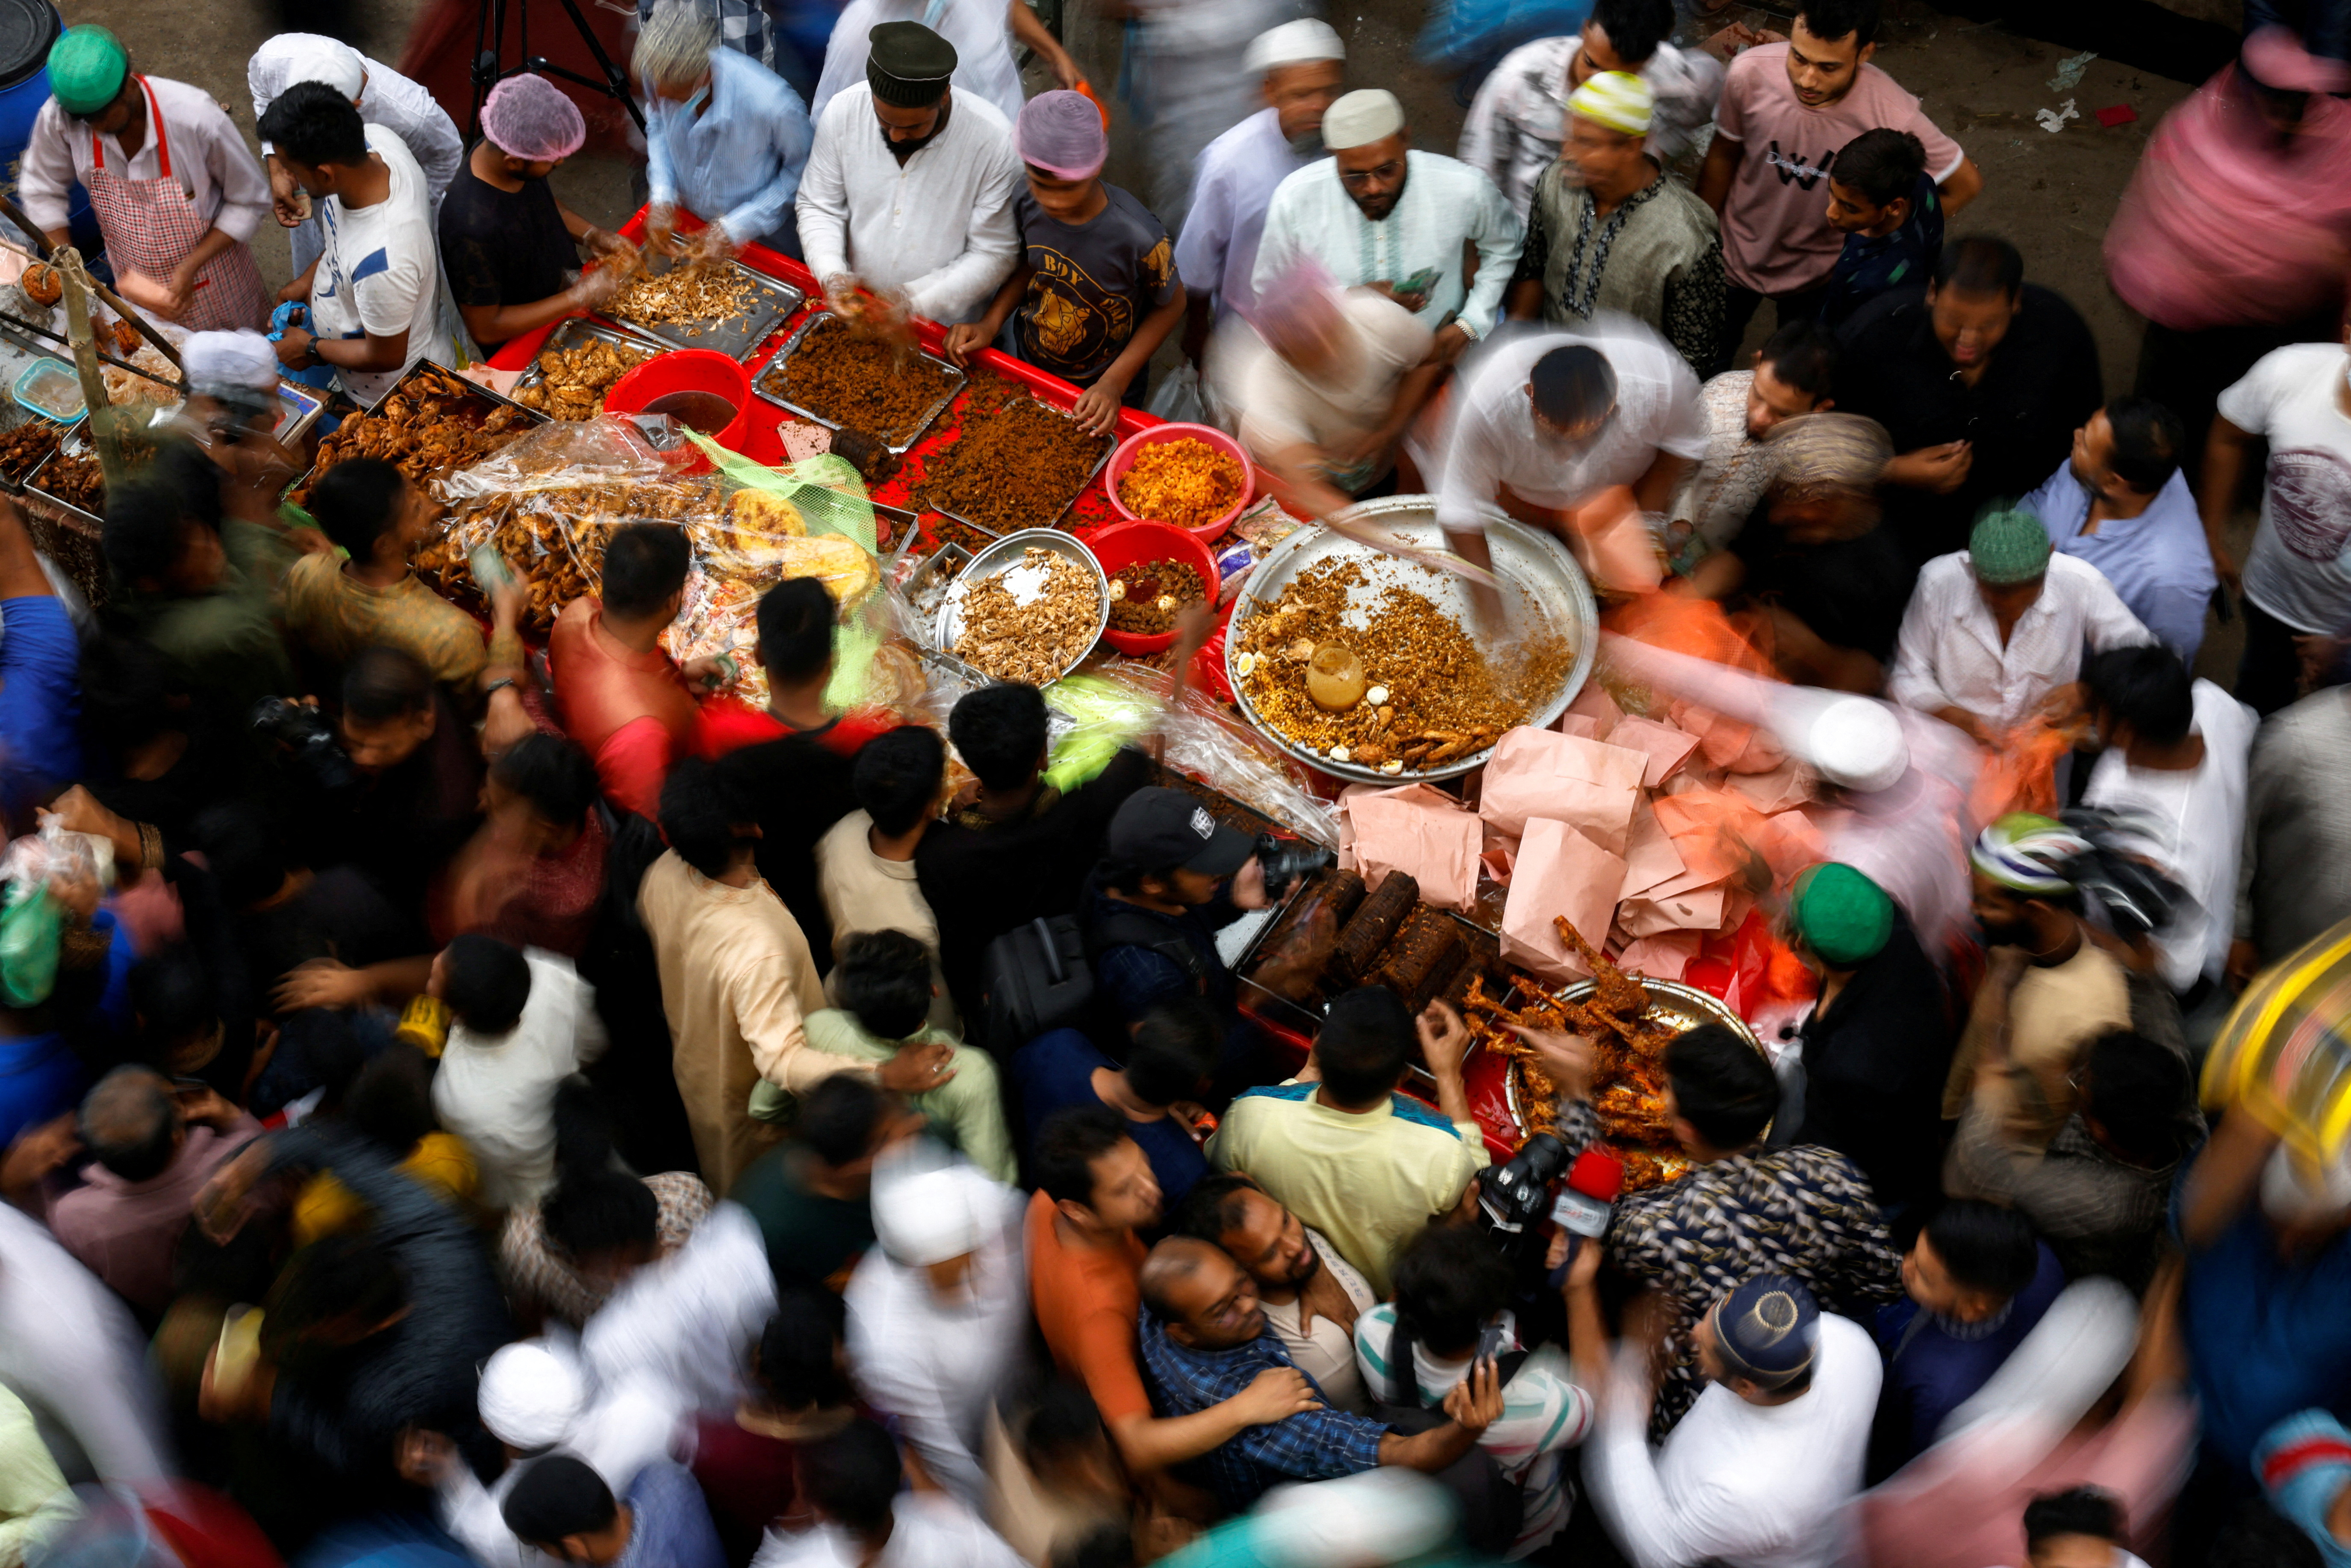 Muslims gather to buy food, on the first day of Ramadan, in Dhaka